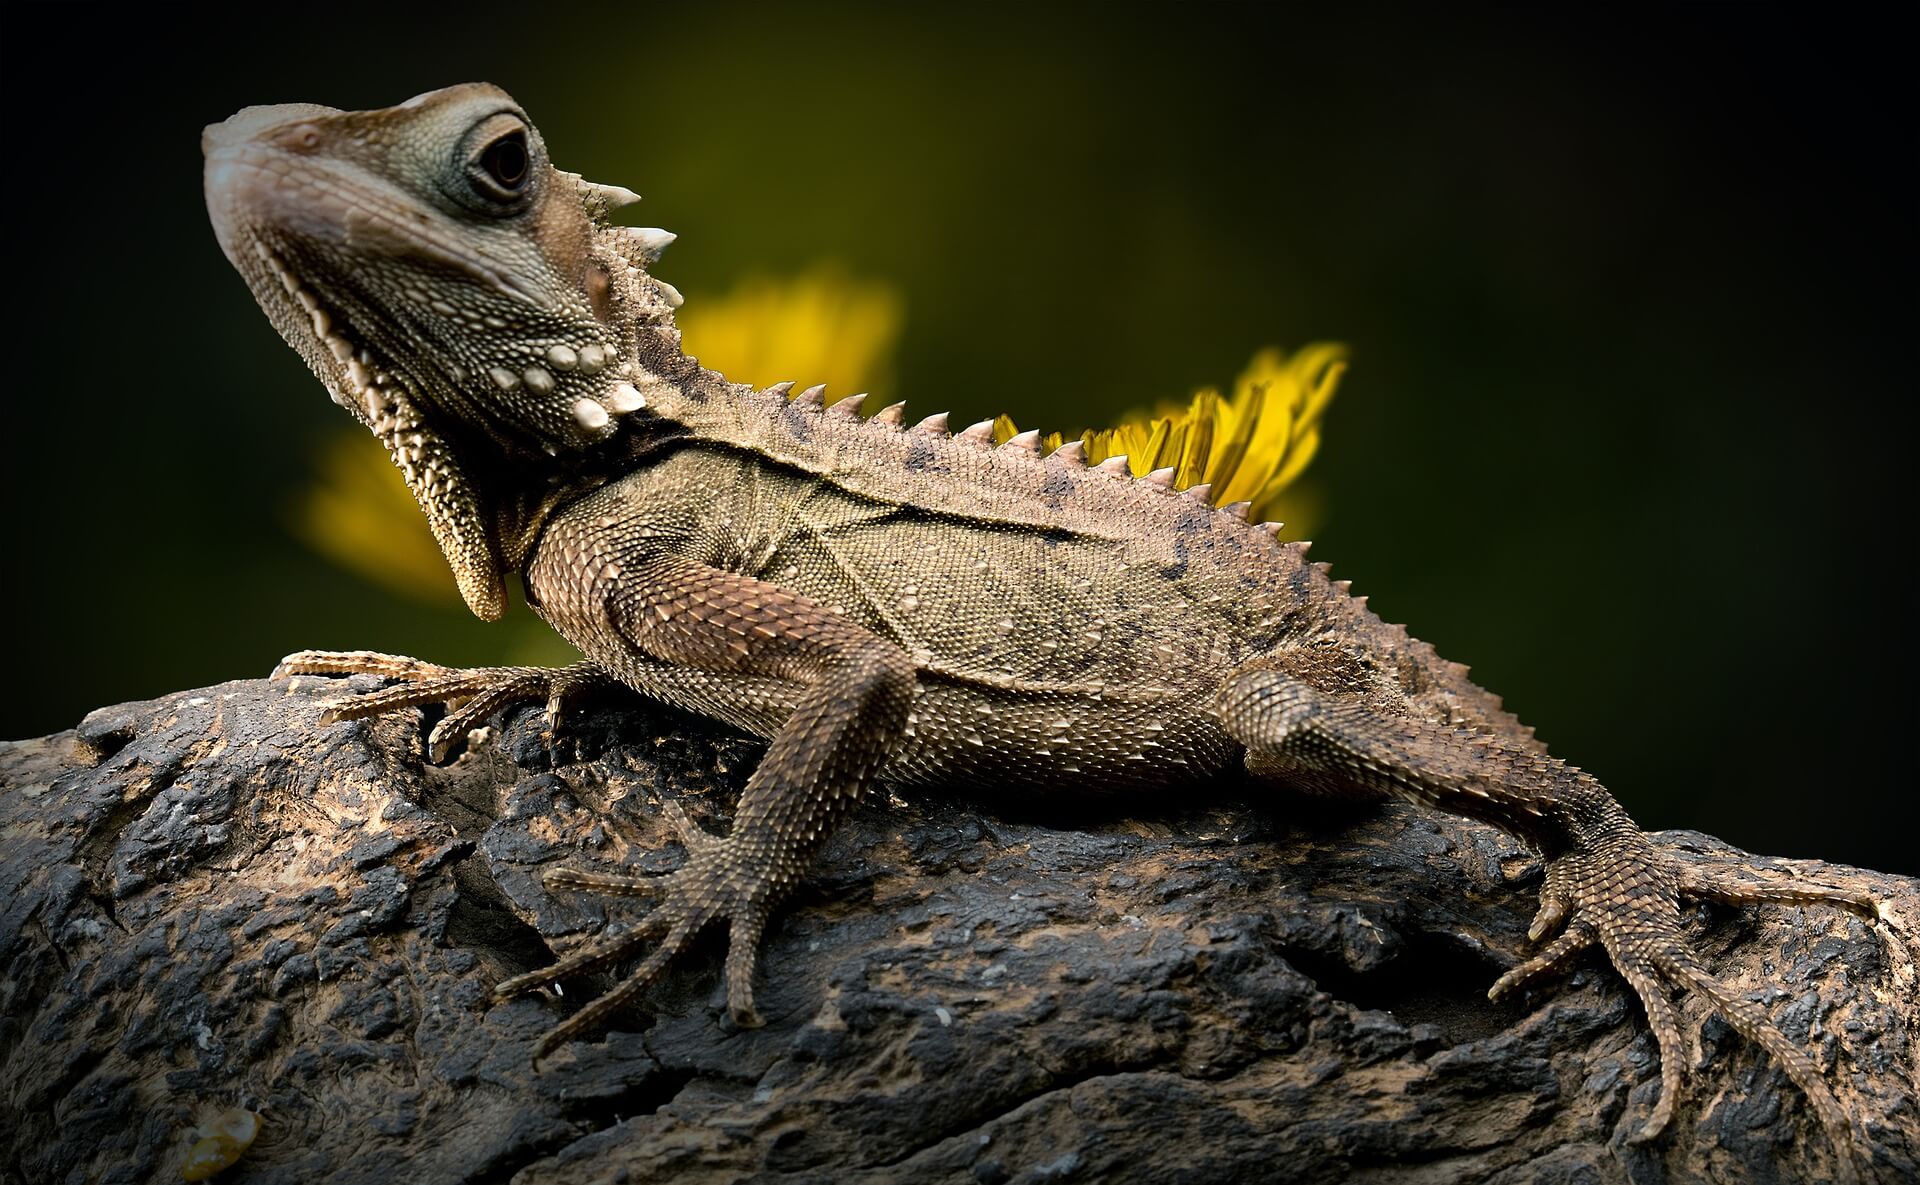 10 Fun, Rare and Unusual Facts about Lizards